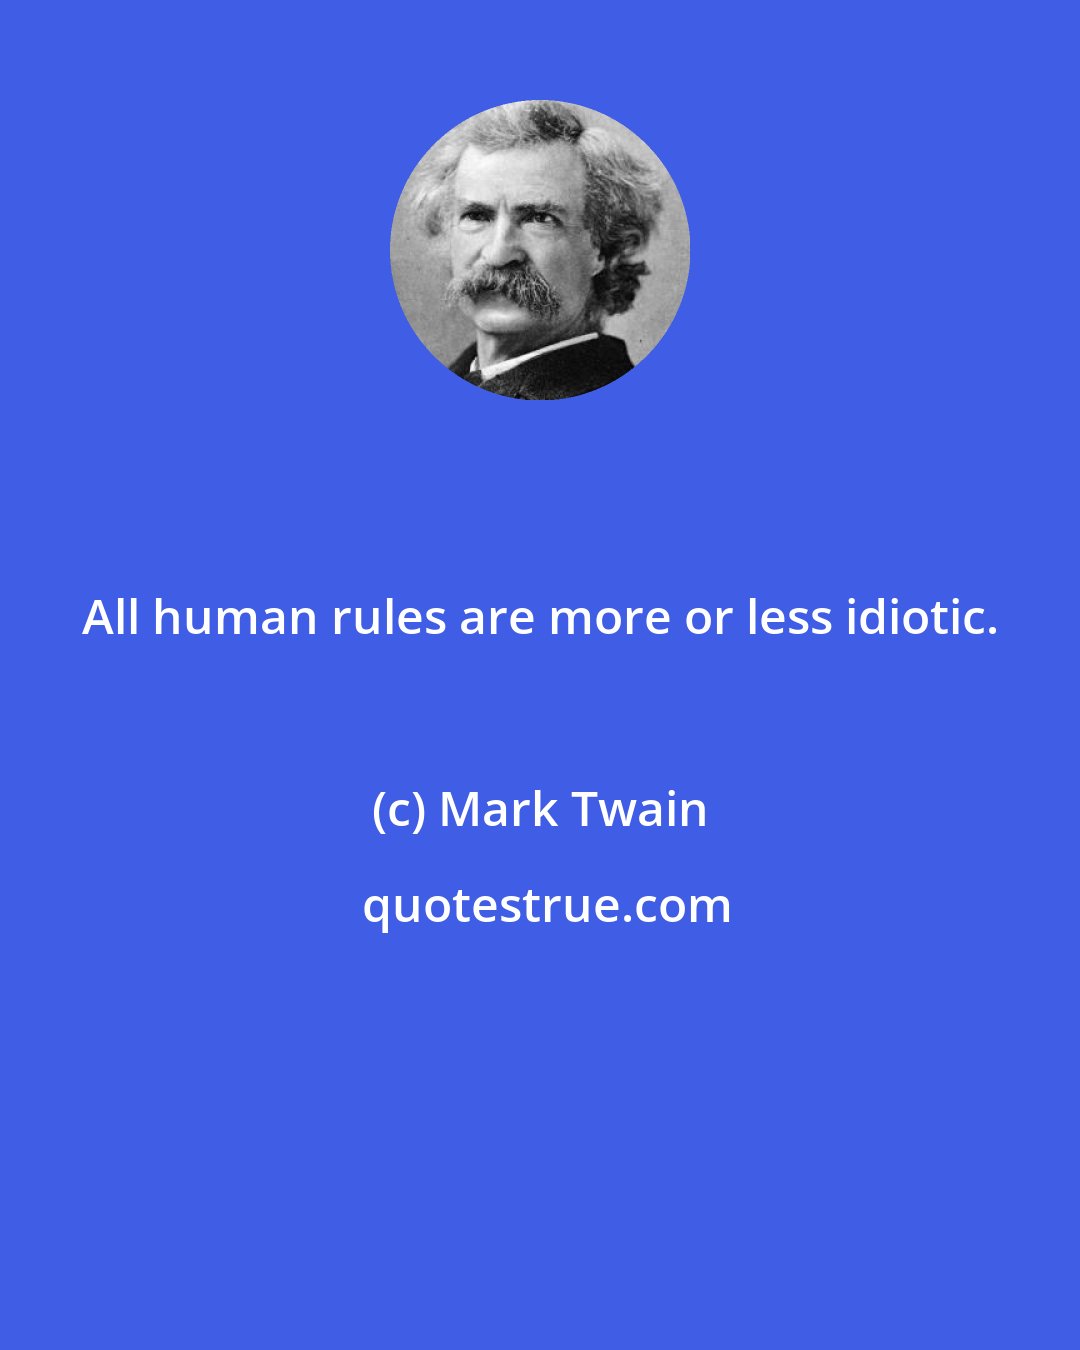 Mark Twain: All human rules are more or less idiotic.